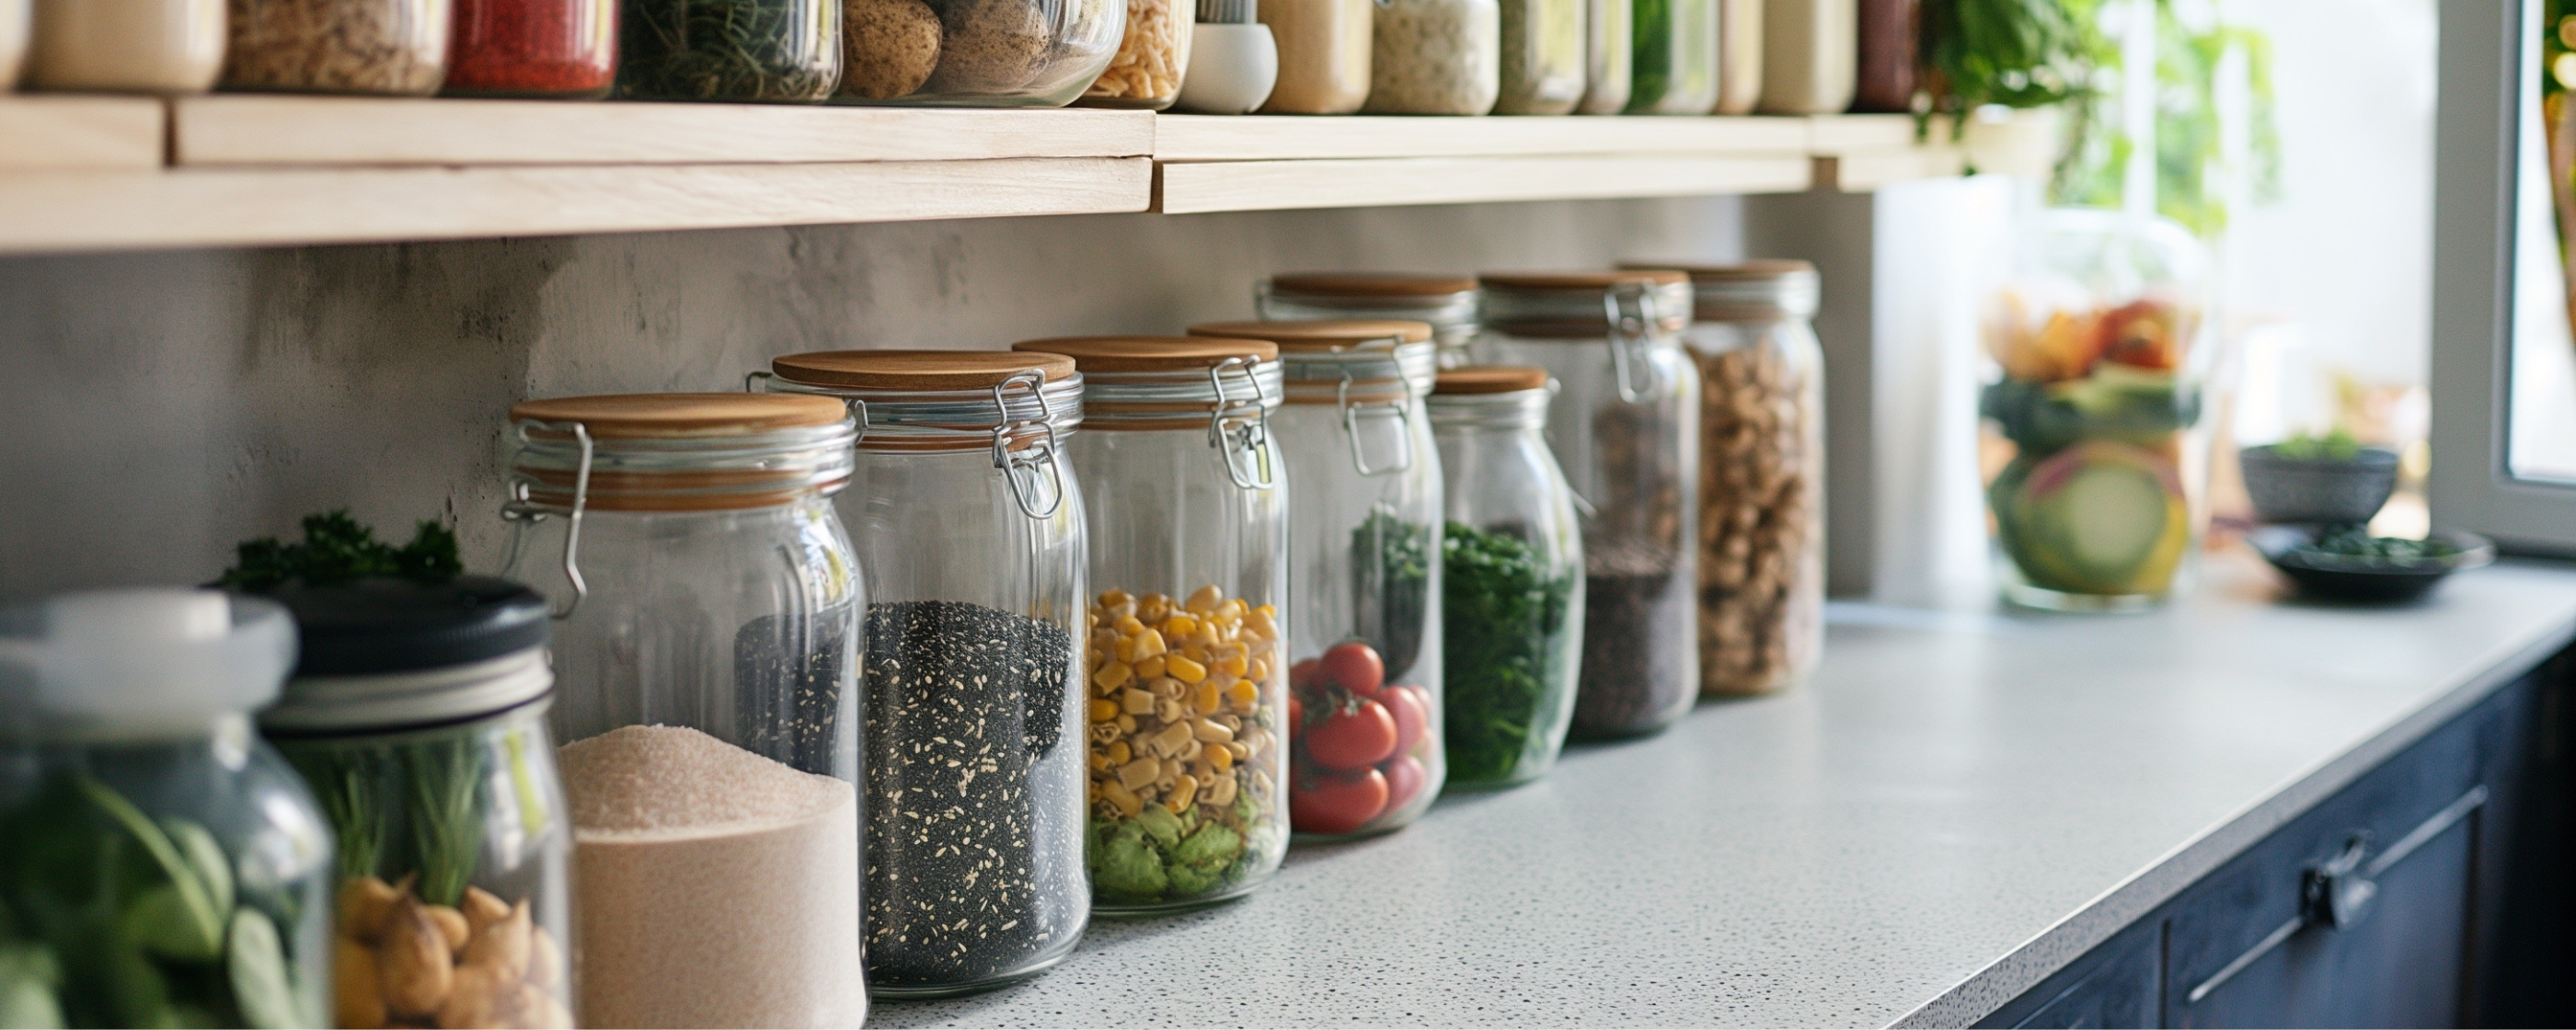 A pantry filled with bulk foods in glass jars.